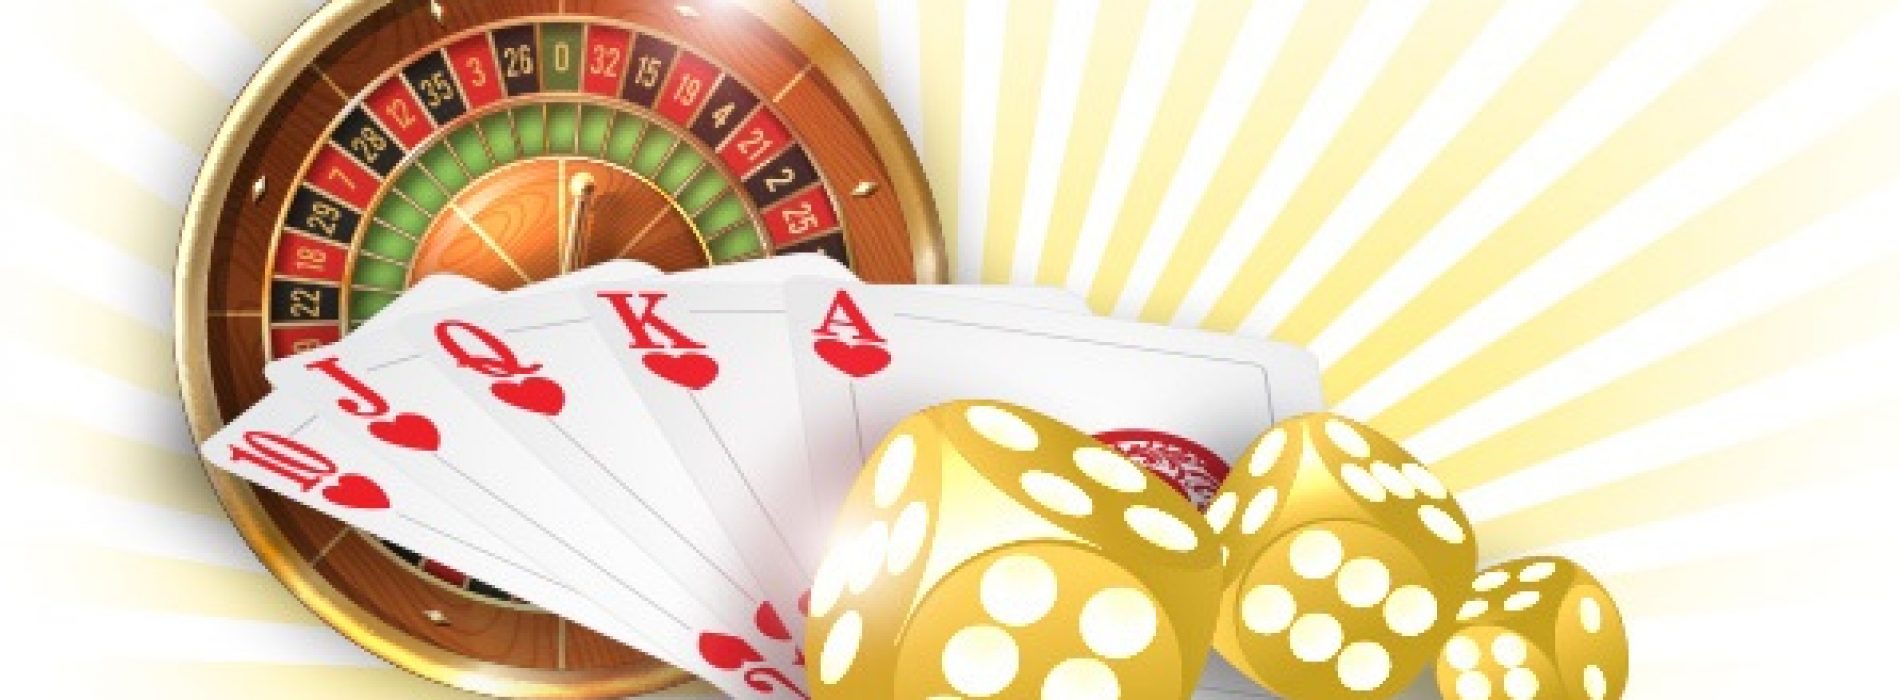 3 Easy Online Casino Games You Should Play